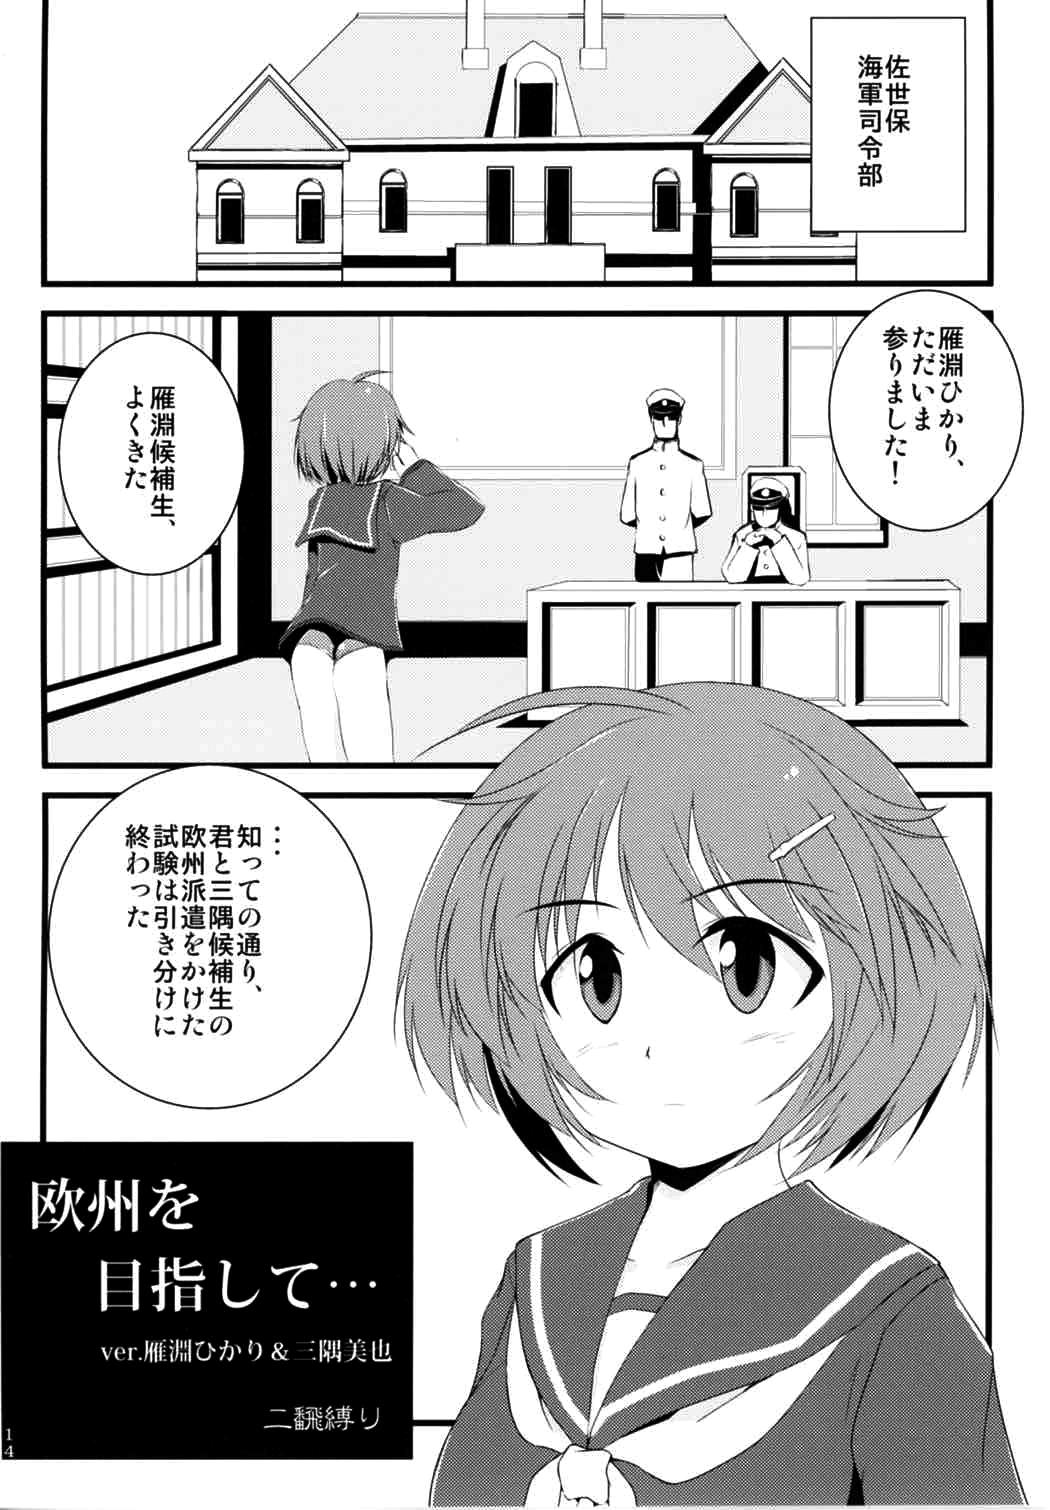 Cock Suck 502 Bad Gateway - Brave witches Chat - Page 6